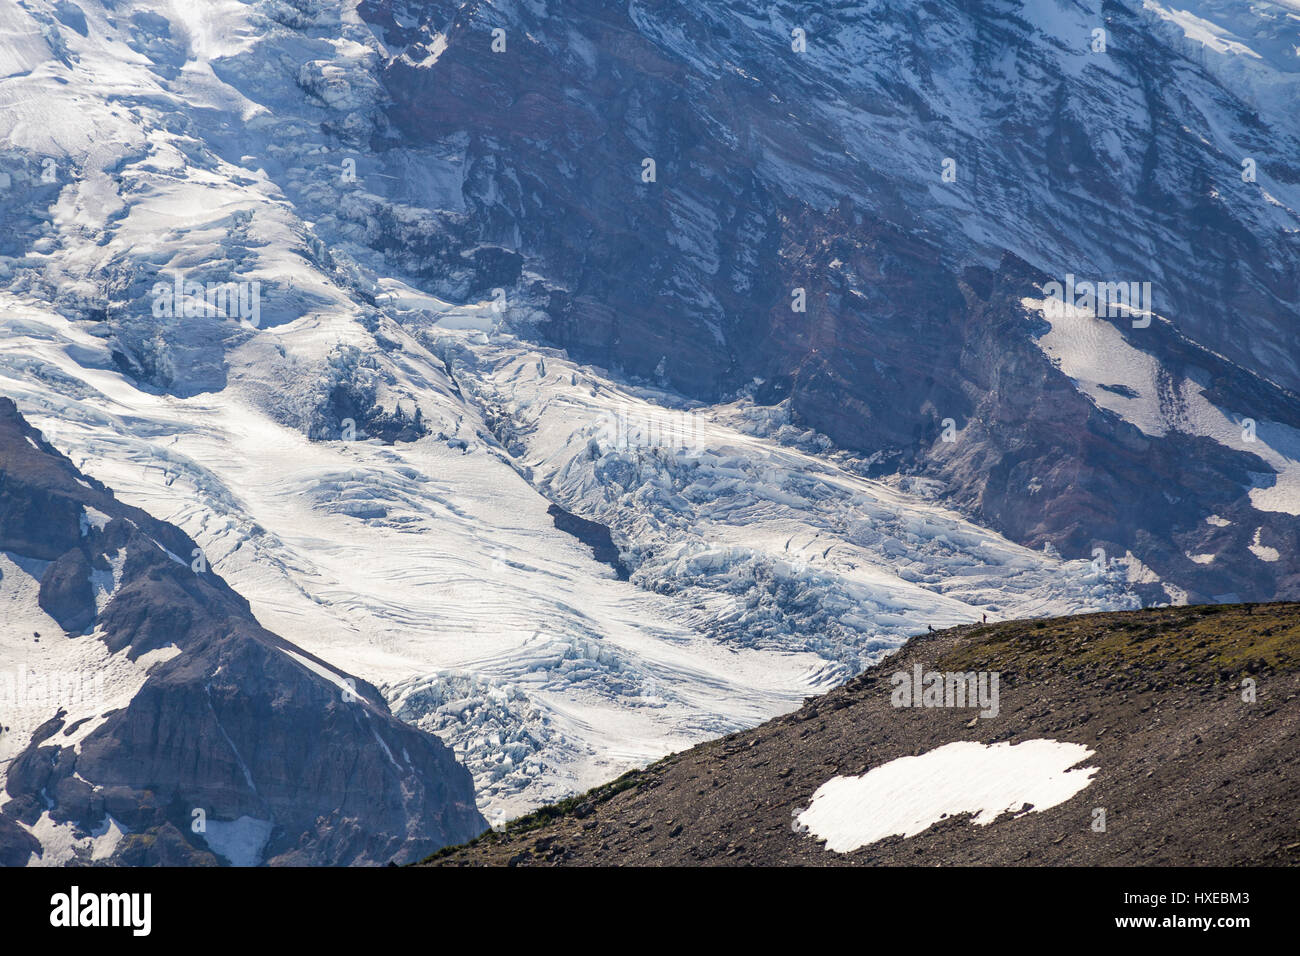 Two people standing on a ridge provide a scale illustrating massive glaciers and icefalls on Mount Rainier's north-east face. Stock Photo